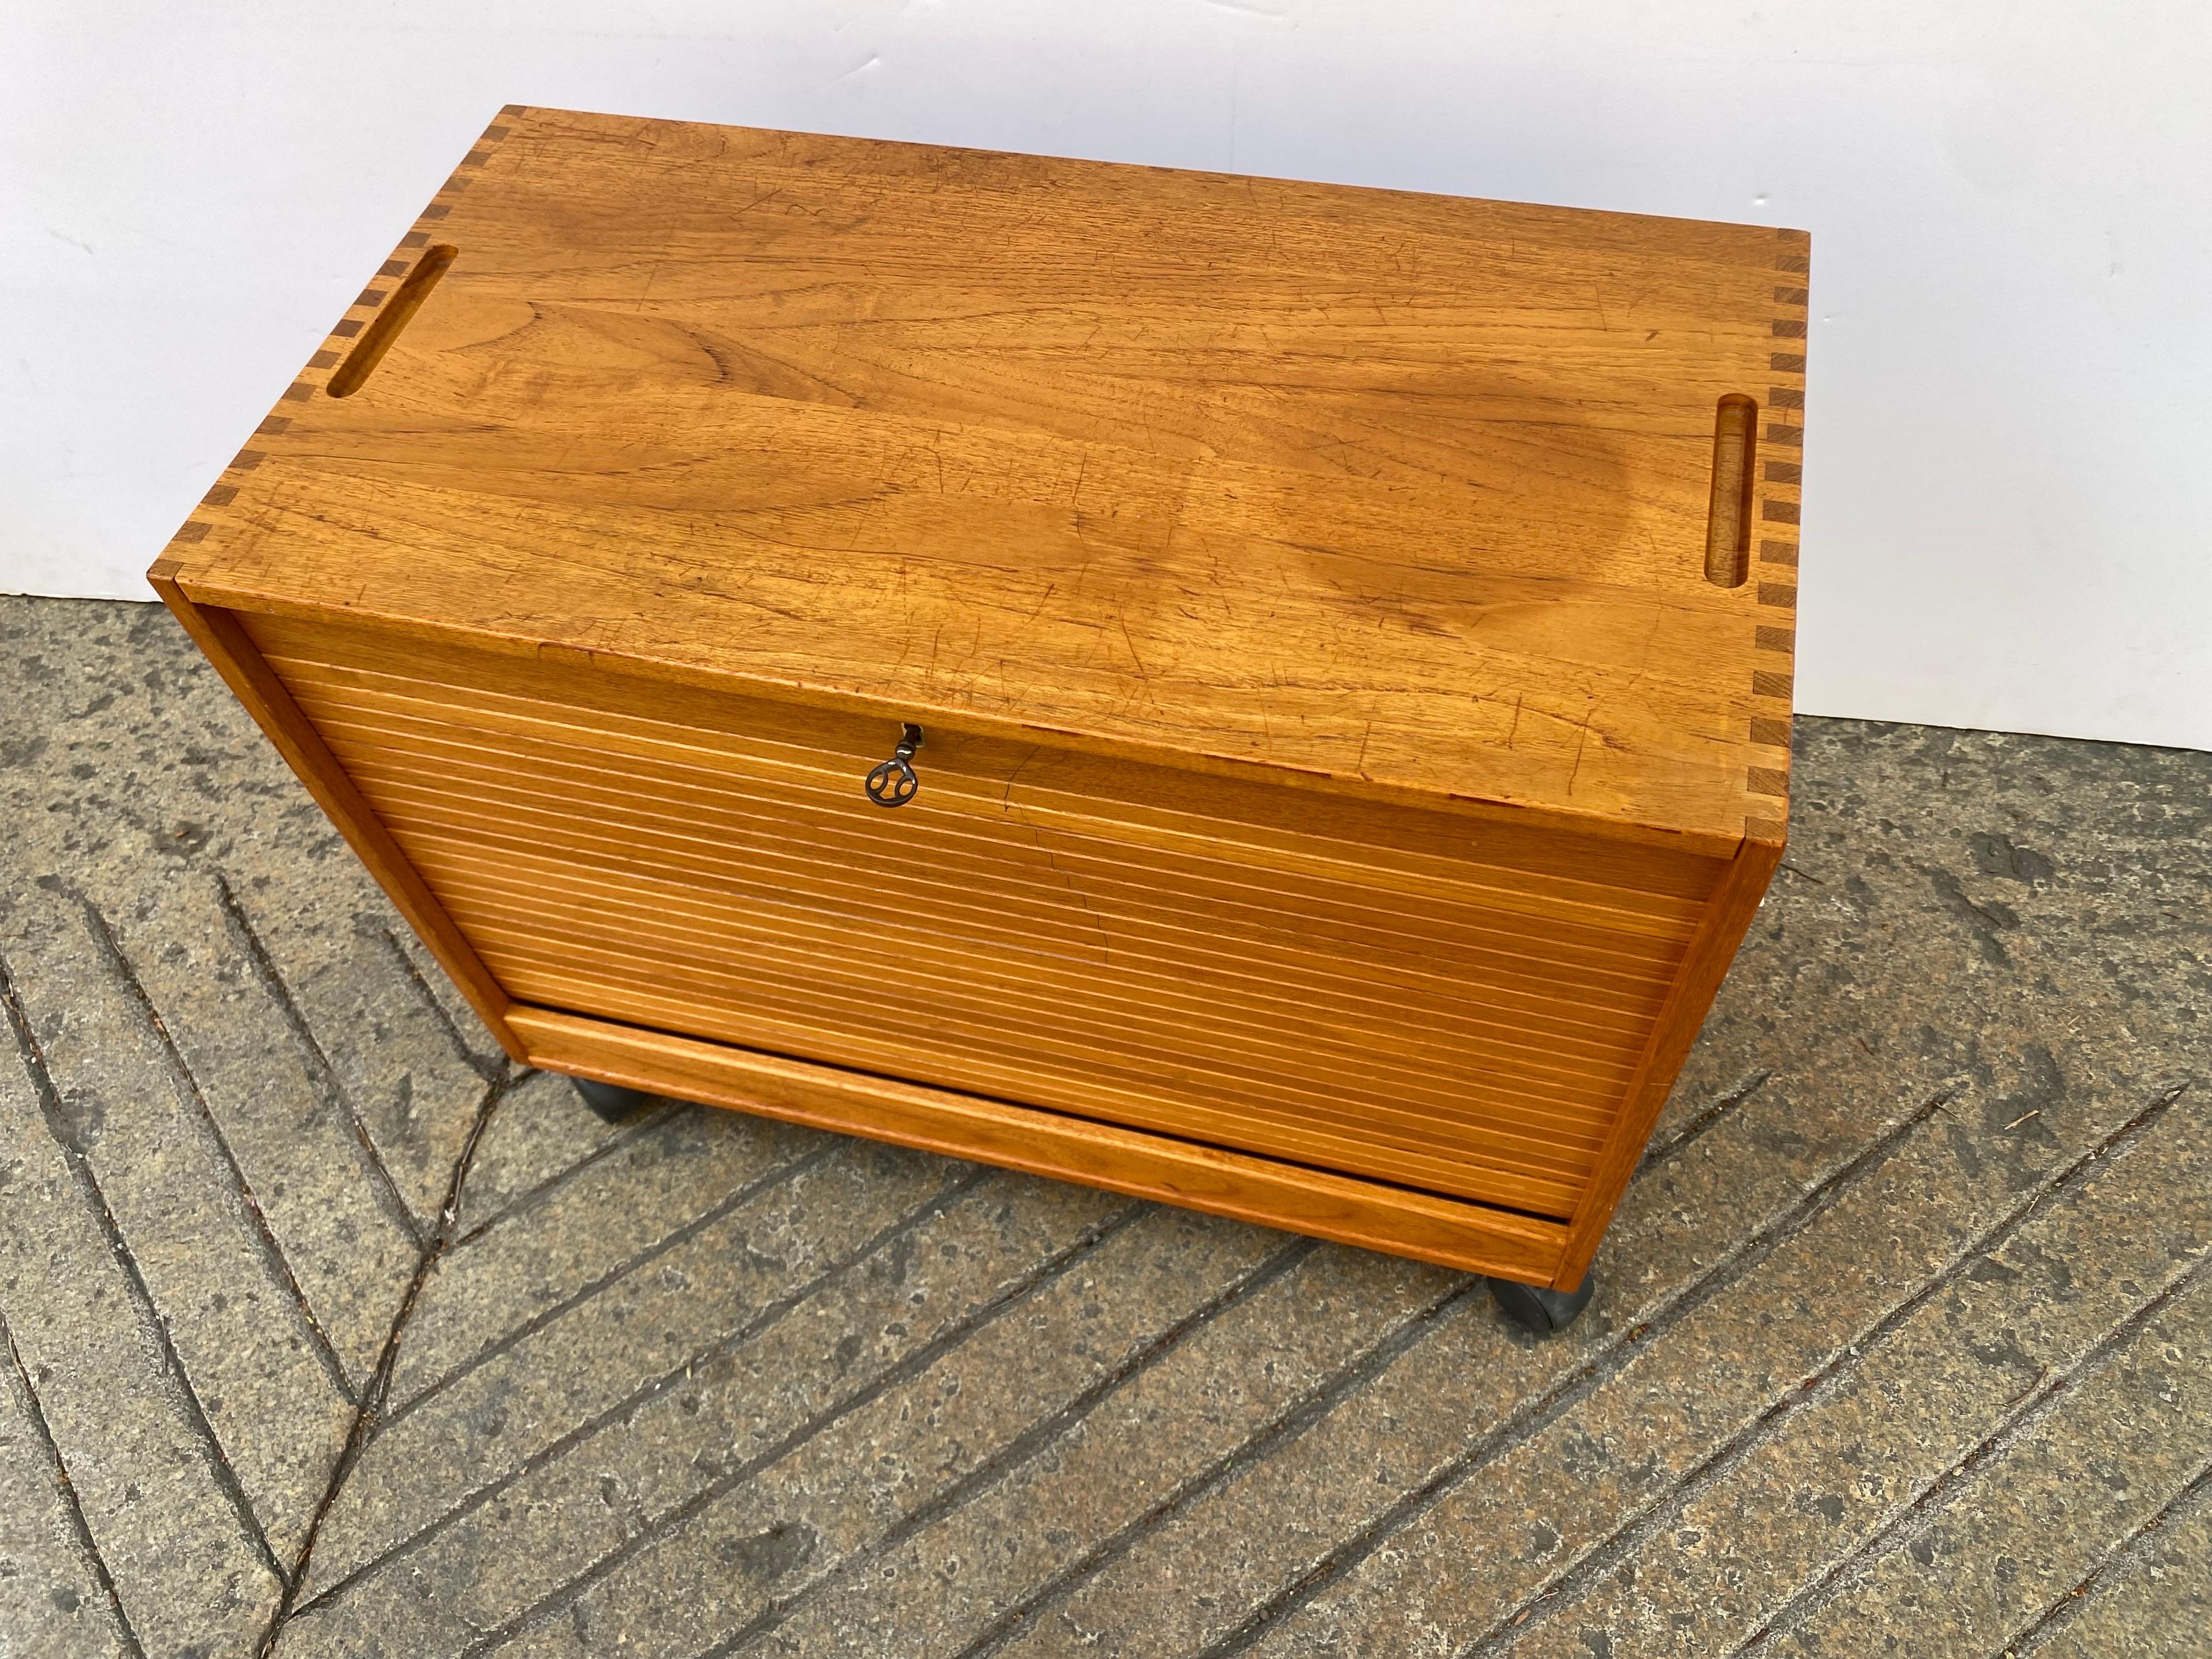 Hadsten Solid Teak Rolling File Cabinet. Tambour Door slides down to reveal a pull out hanging file. Left side open for additional storage. Shows signs of use and wear, but solid teak is not your typical construction.